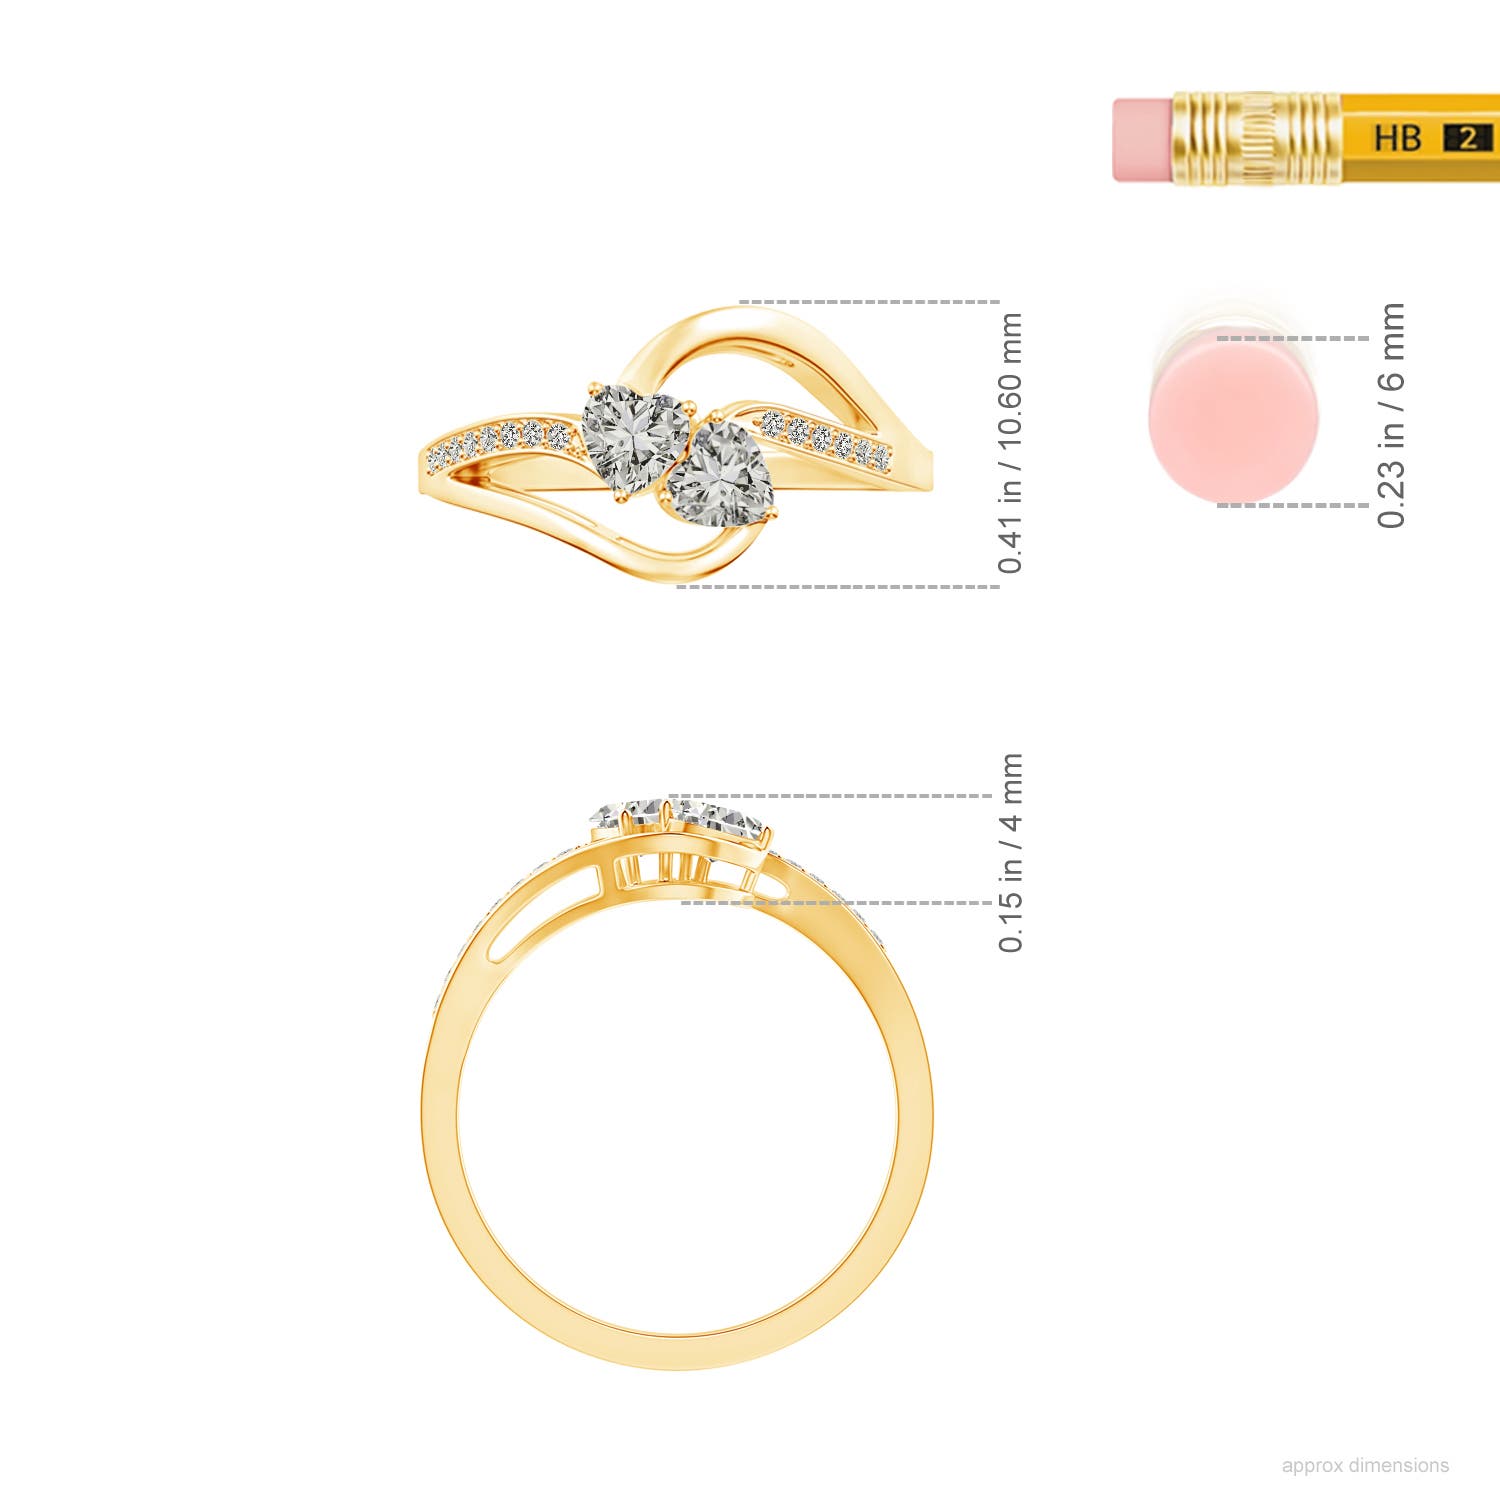 K, I3 / 0.45 CT / 14 KT Yellow Gold